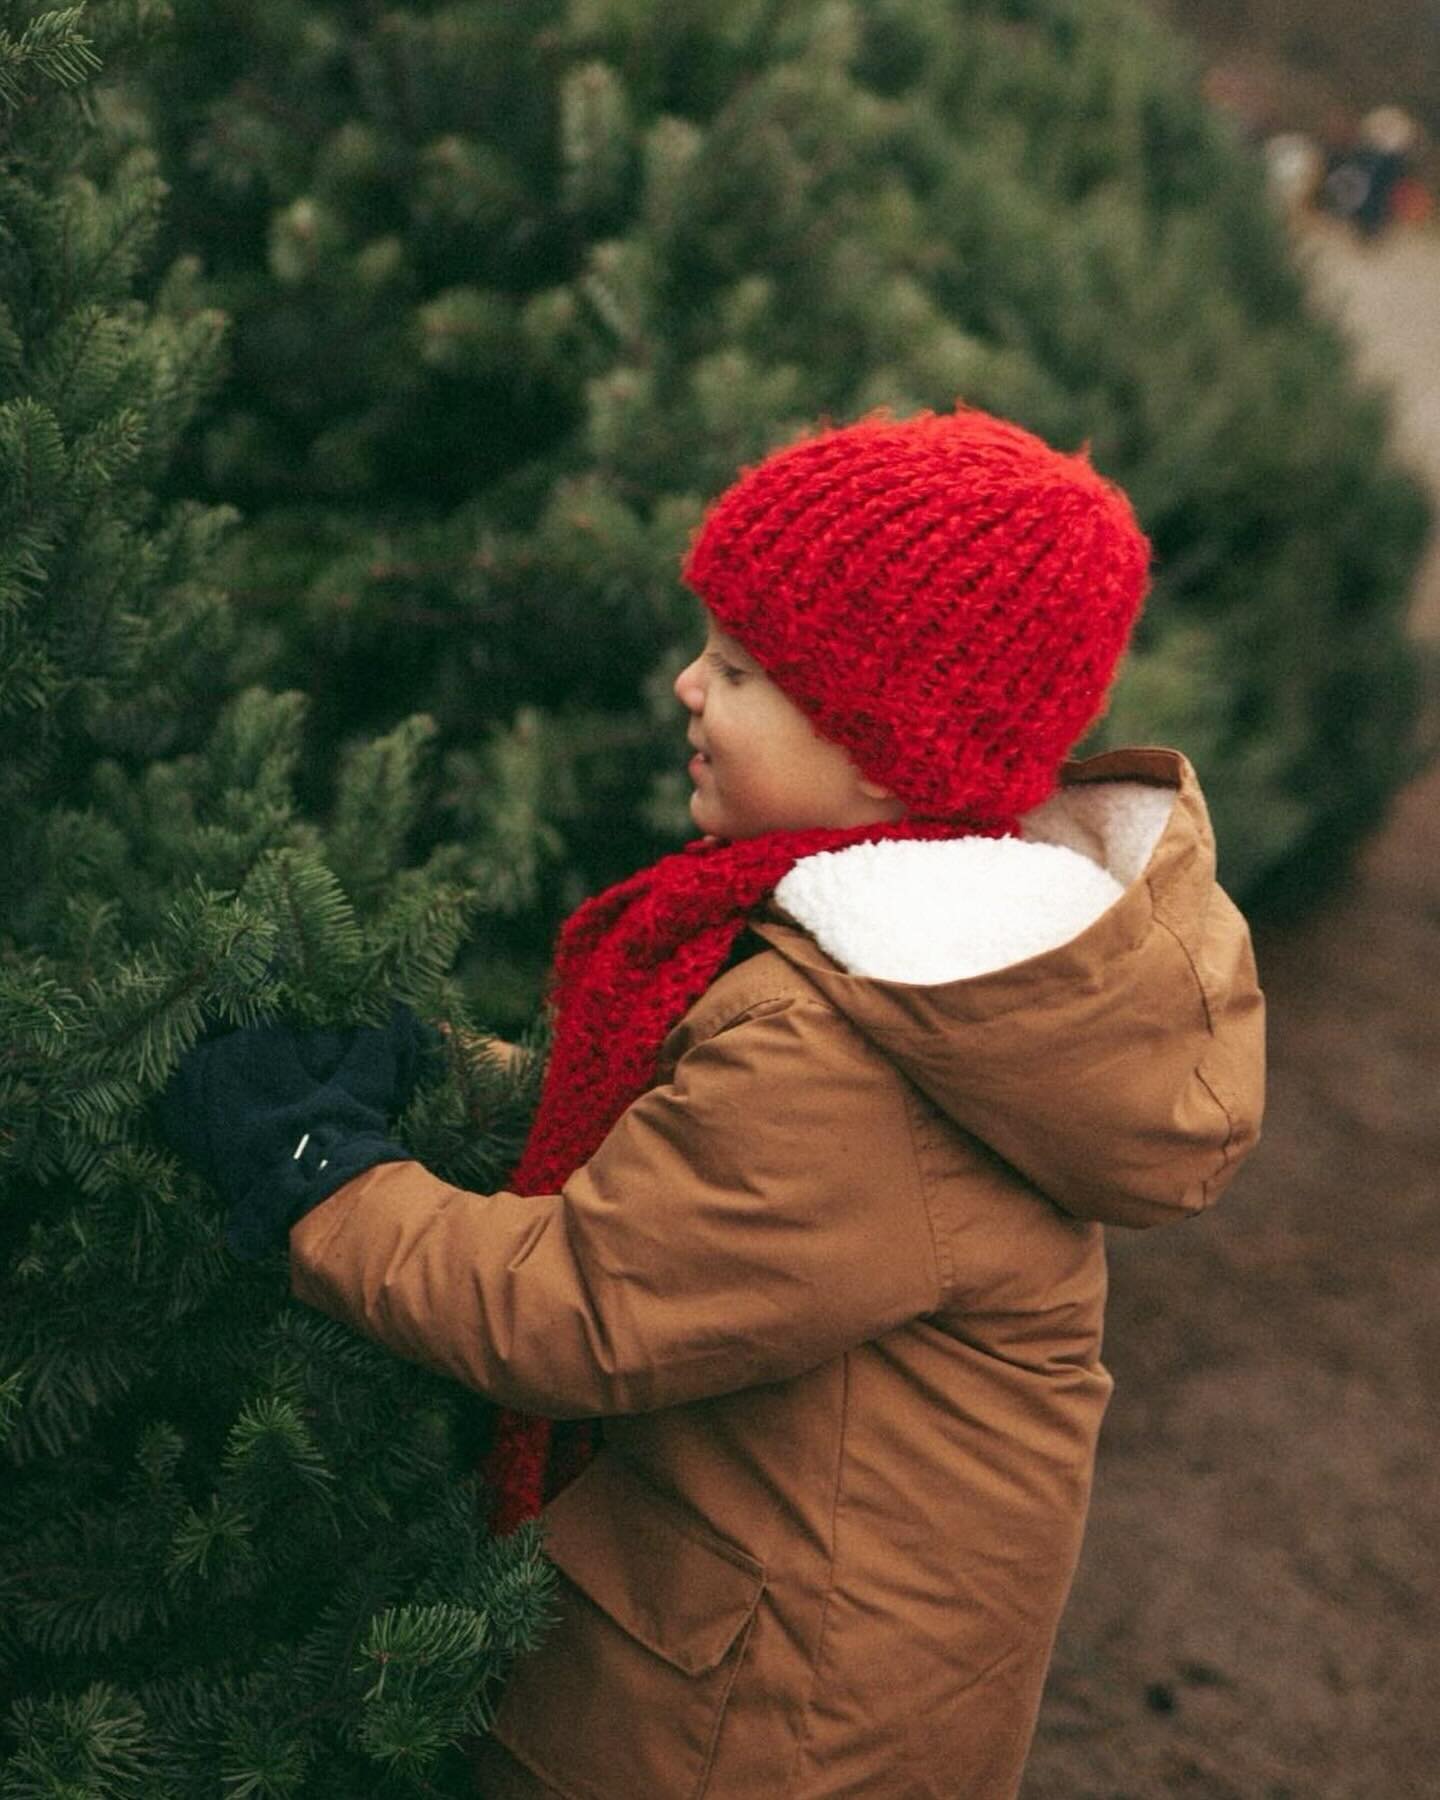 Guys, we finally got our tree last weekend. Yay! We&rsquo;ve never cut our own before, we always had an artificial one, but getting it at the Christmas Tree Farm was a fun experience. My kids loved running around and I guess they were more excited ab